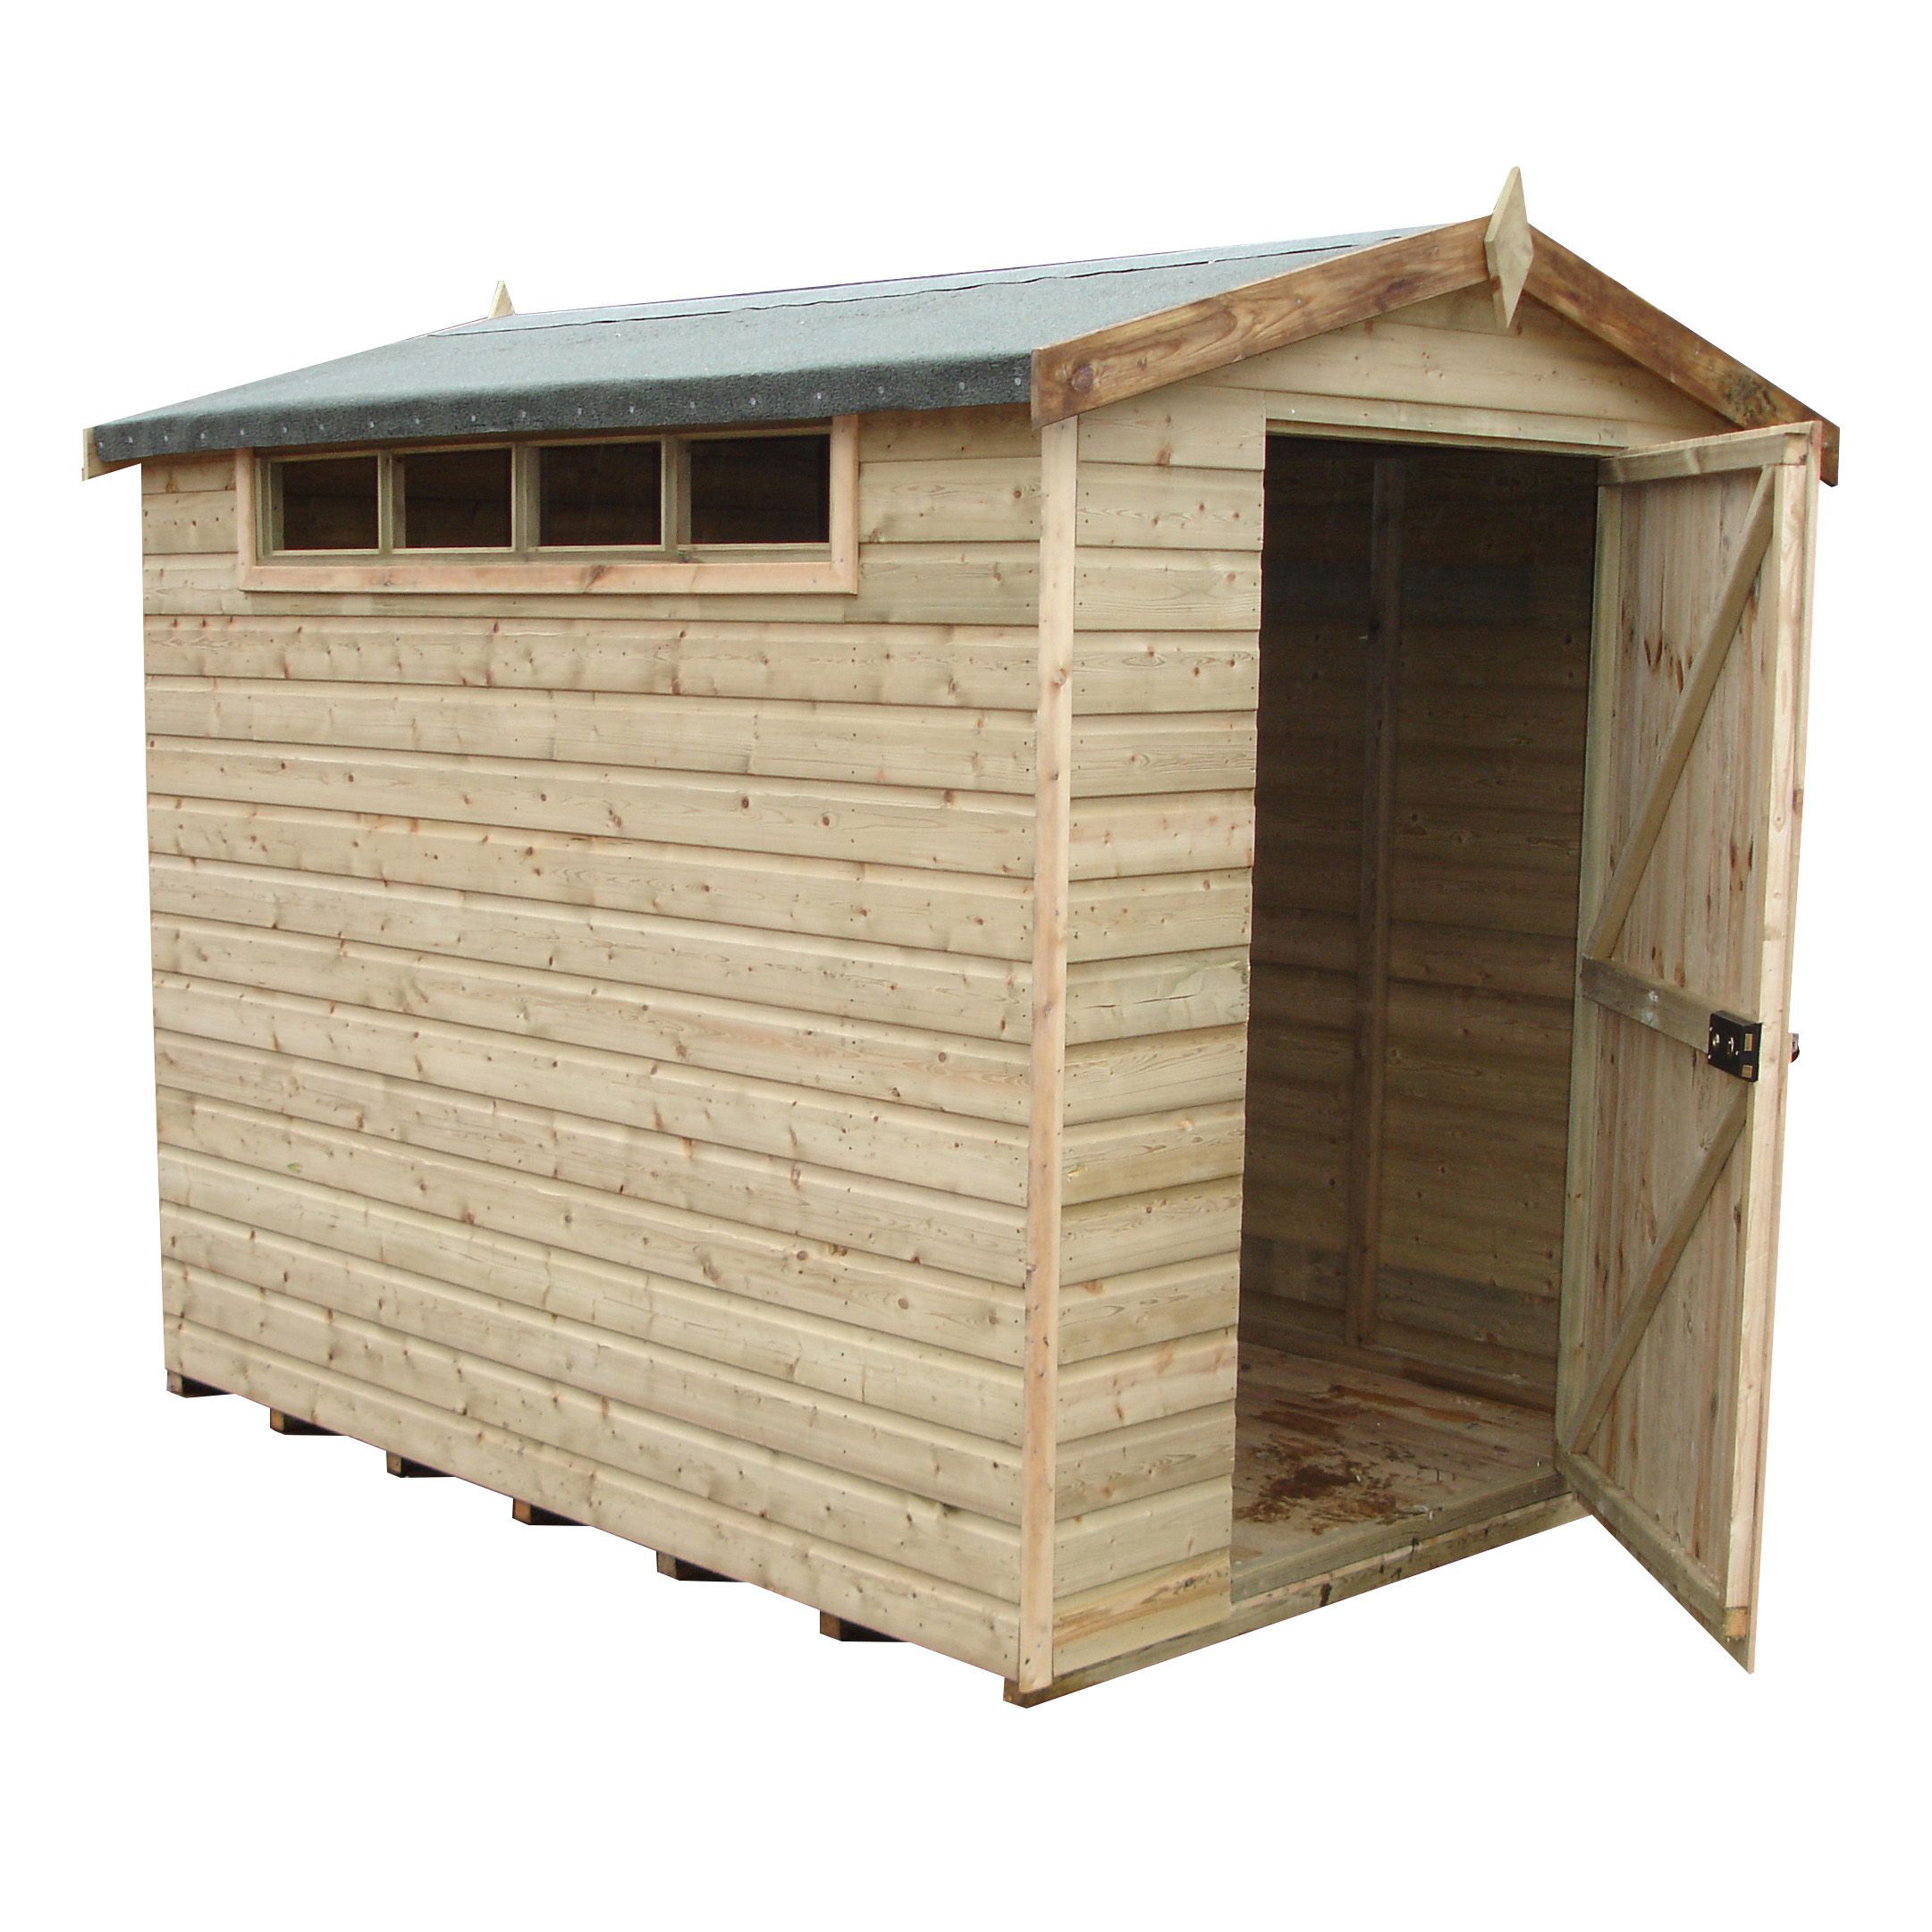 Shire 10x6 Apex Shed - Base not includedAssembly required